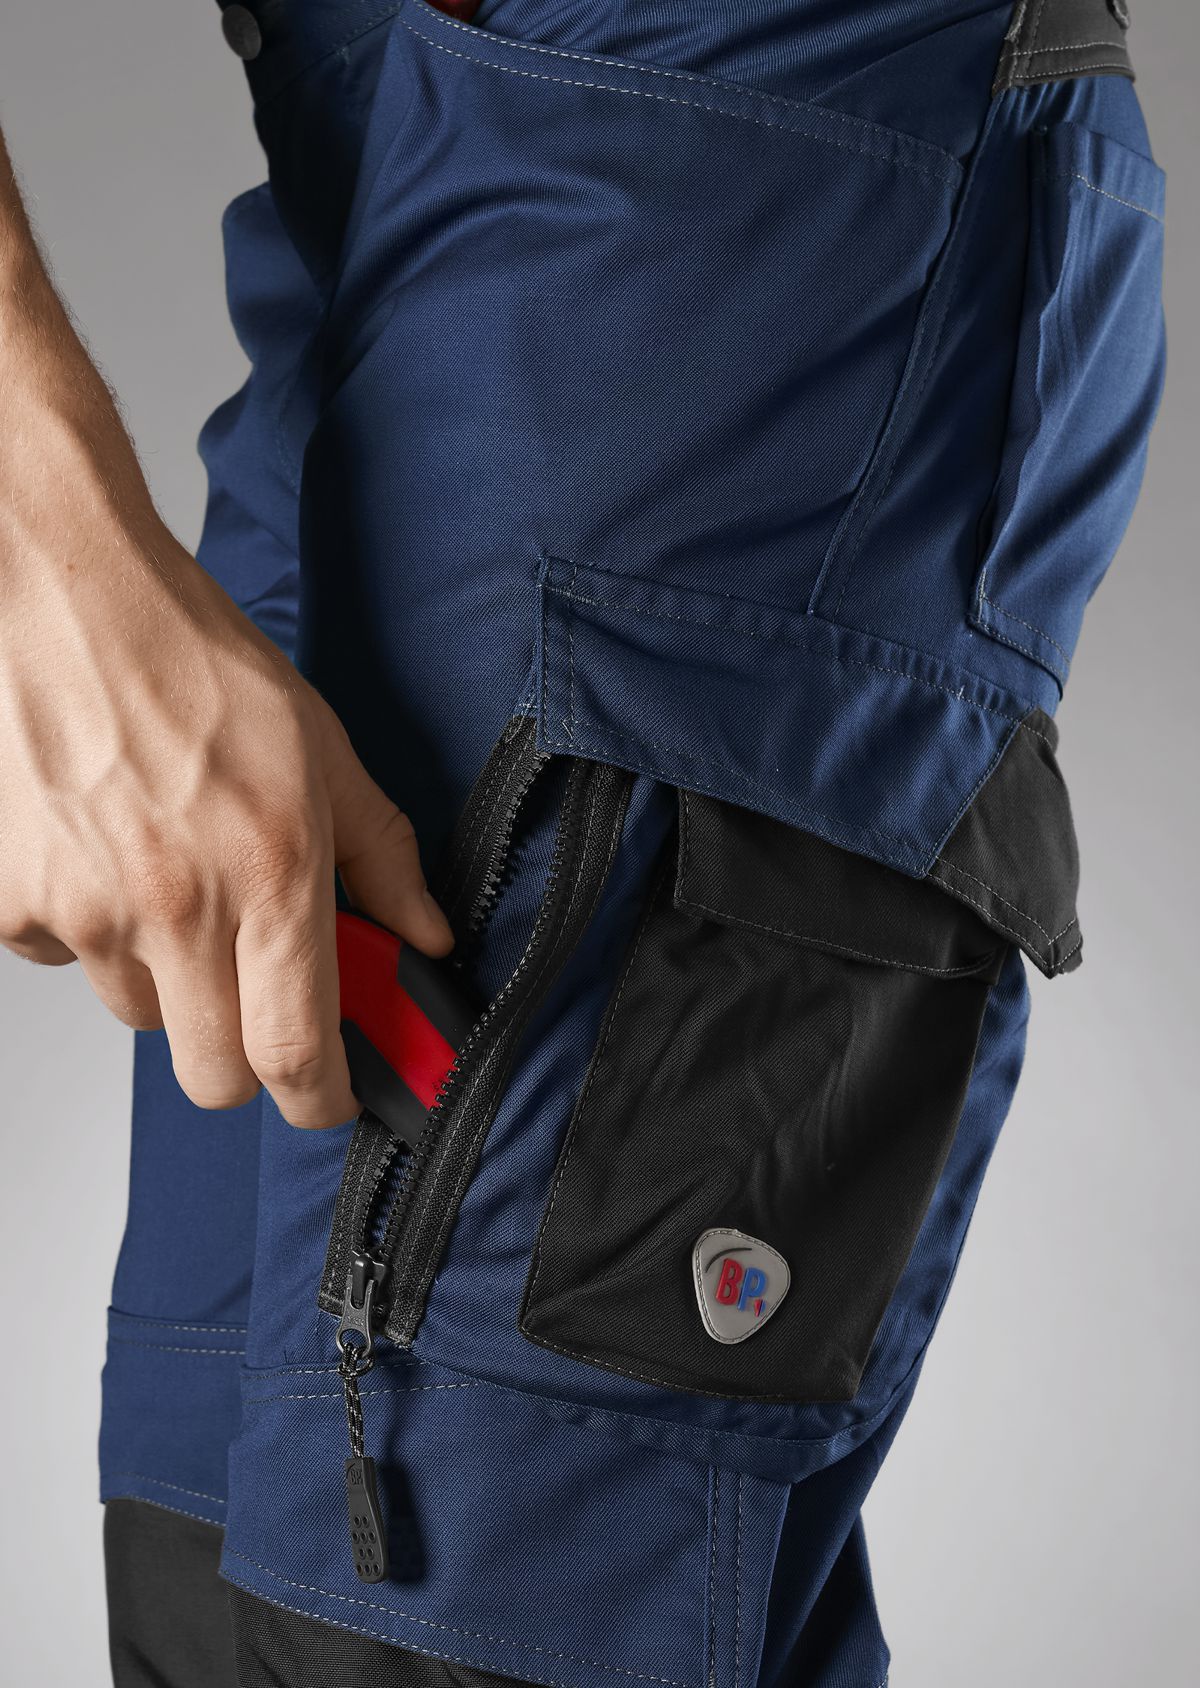 BP® Work trousers with knee pad pockets